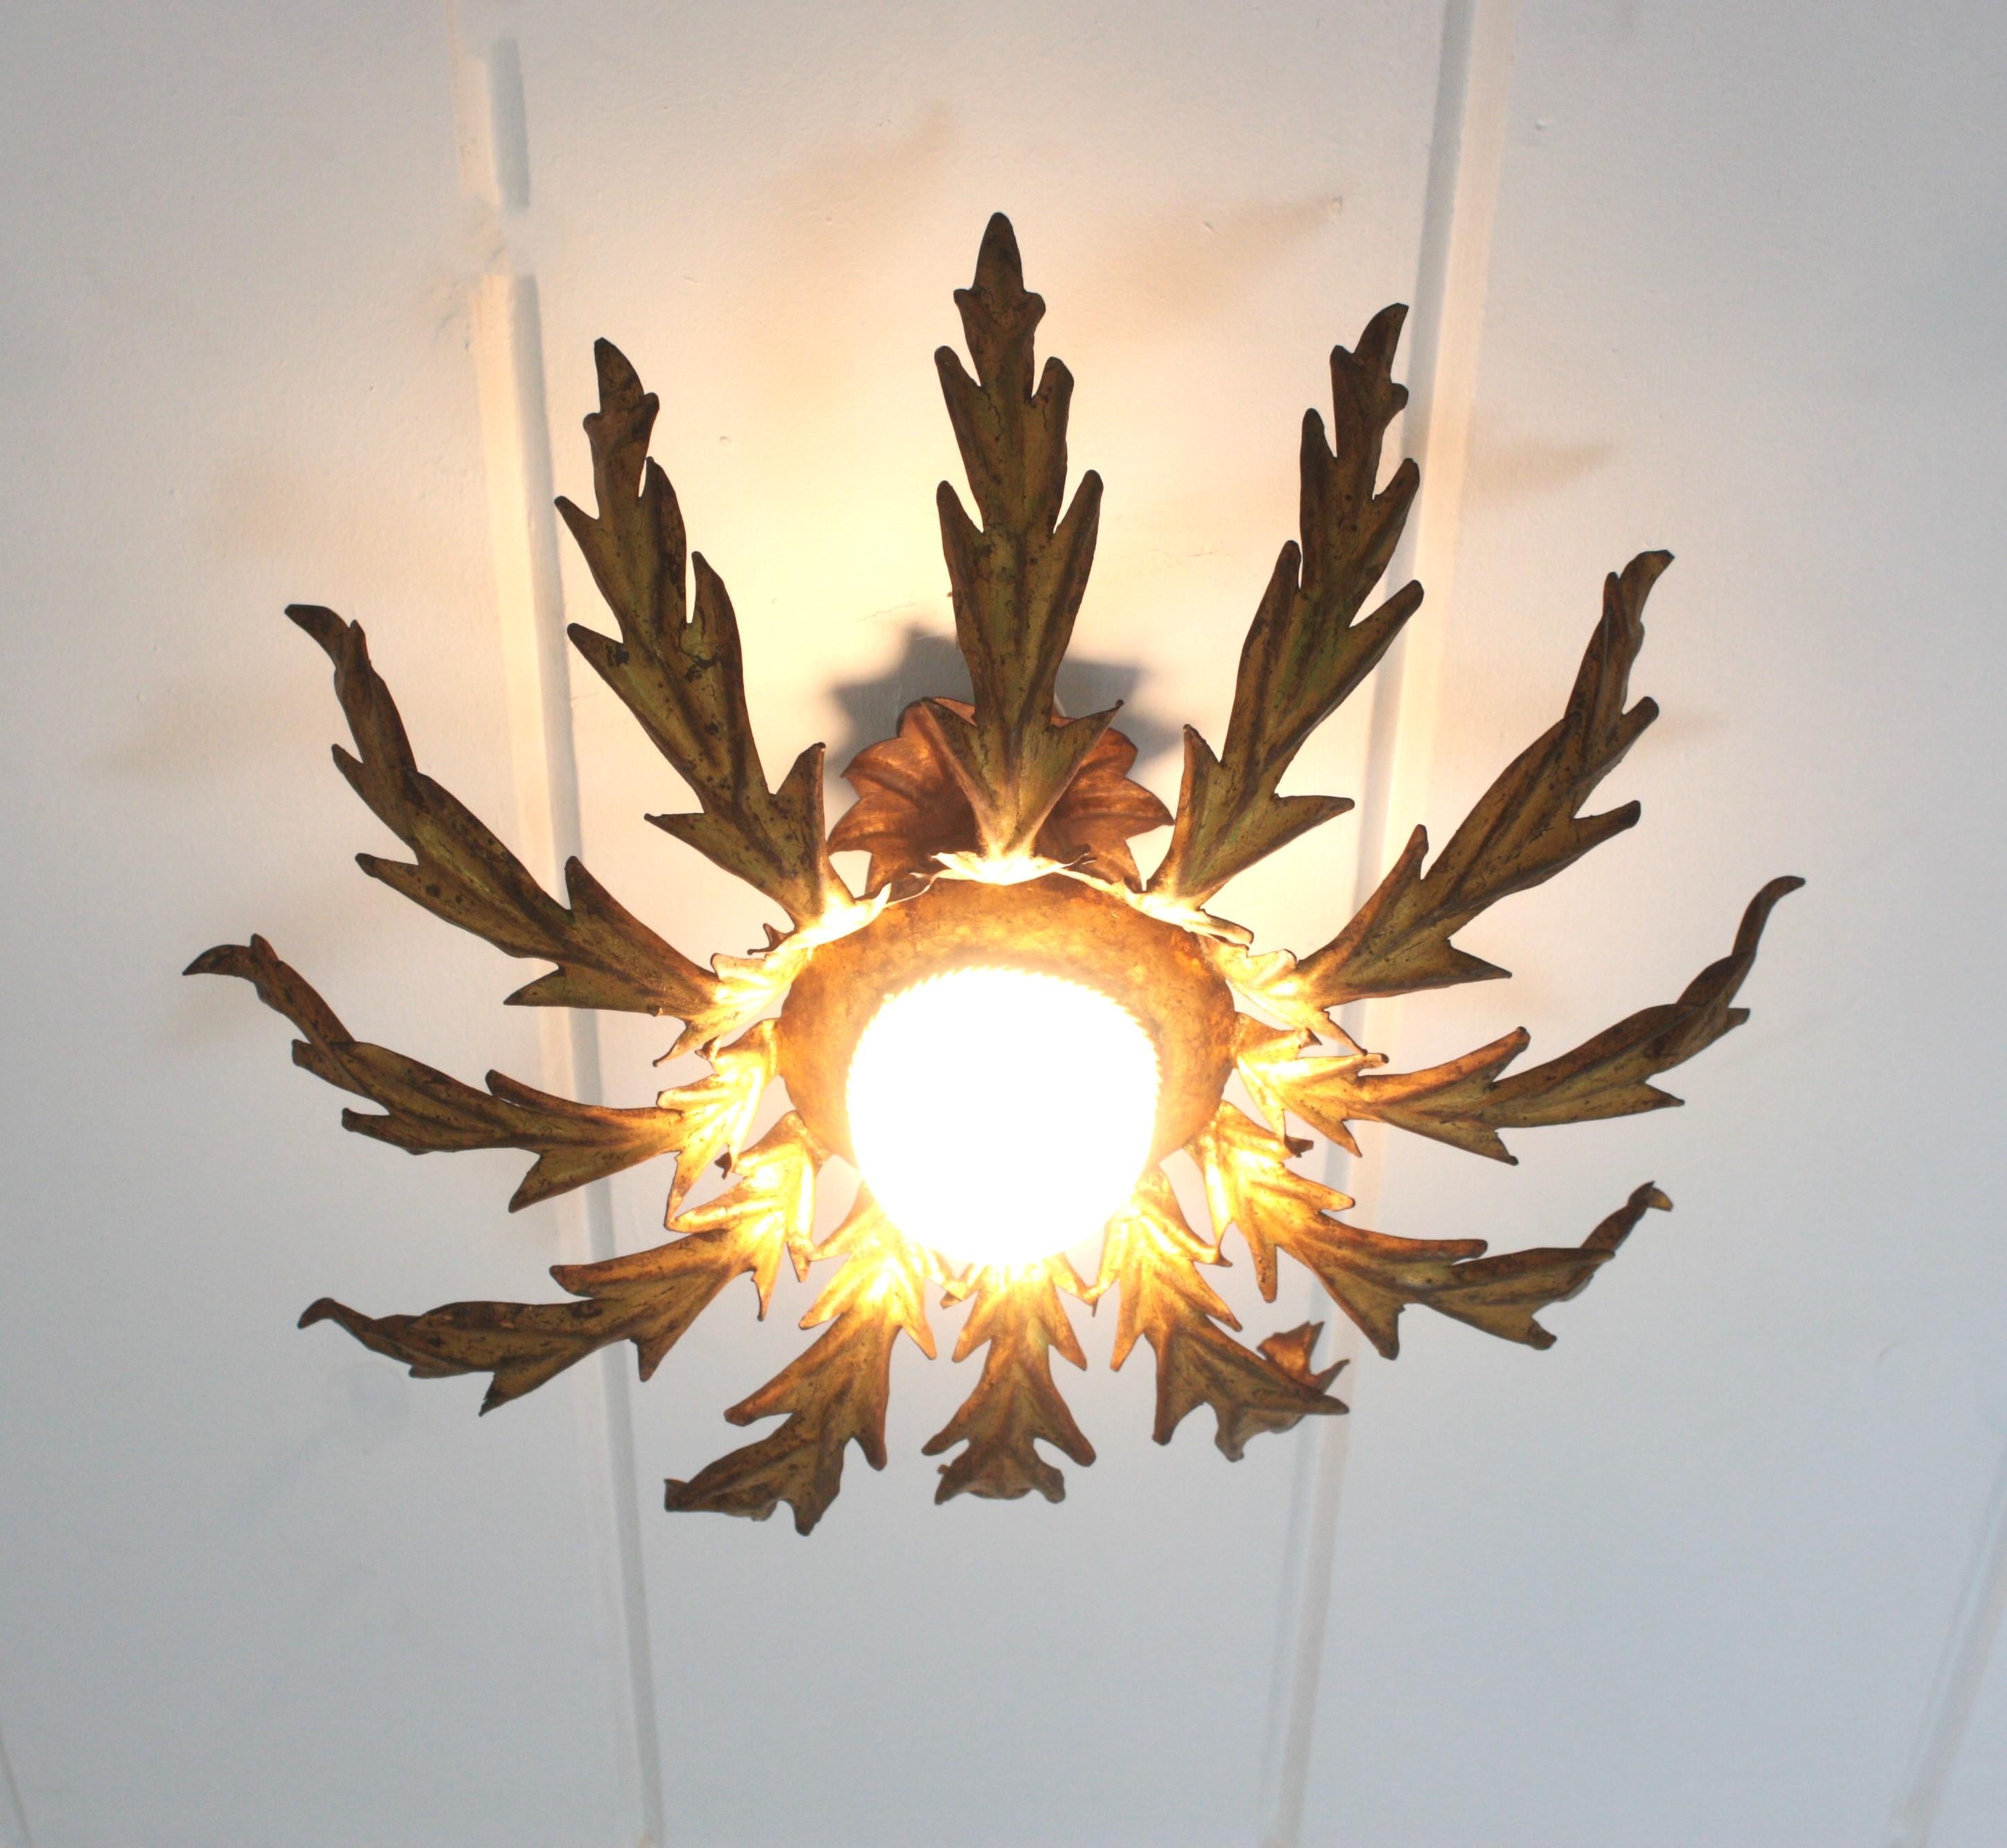 French Sunburst Leafed Ceiling Light Fixture in Gilt Iron, 1940s For Sale 6